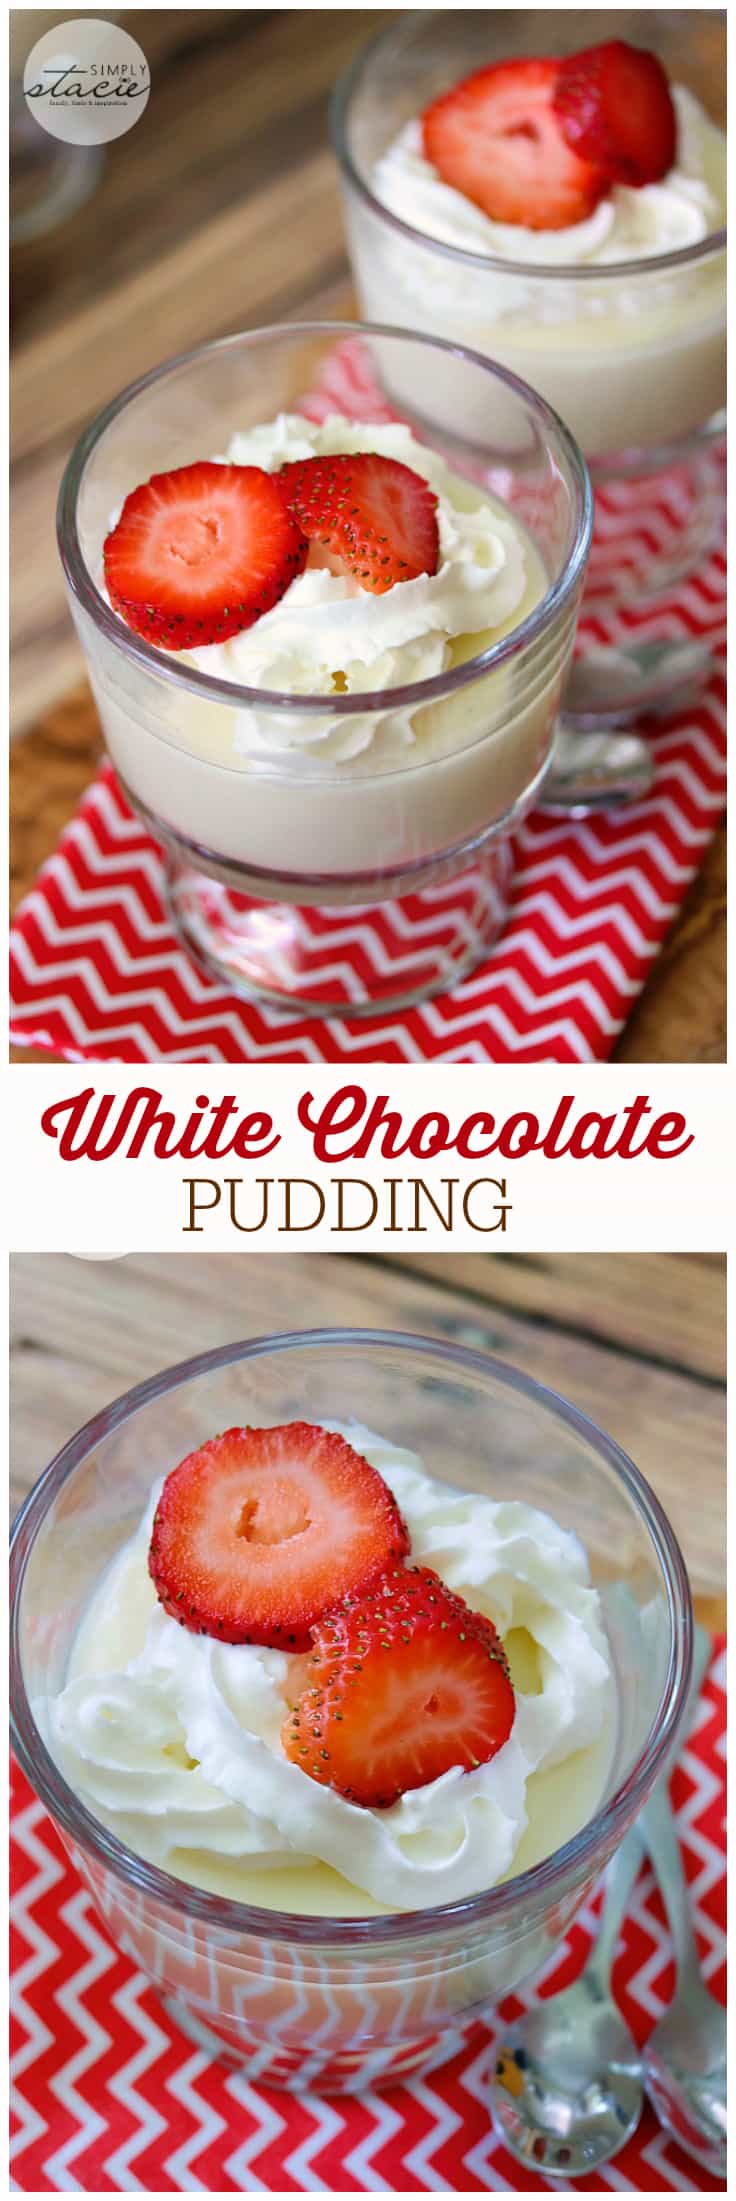 White Chocolate Pudding - White chocolate fans rejoice! Simple and sweet, this pudding goes so well with fresh fruit or served solo for a mid-day treat.